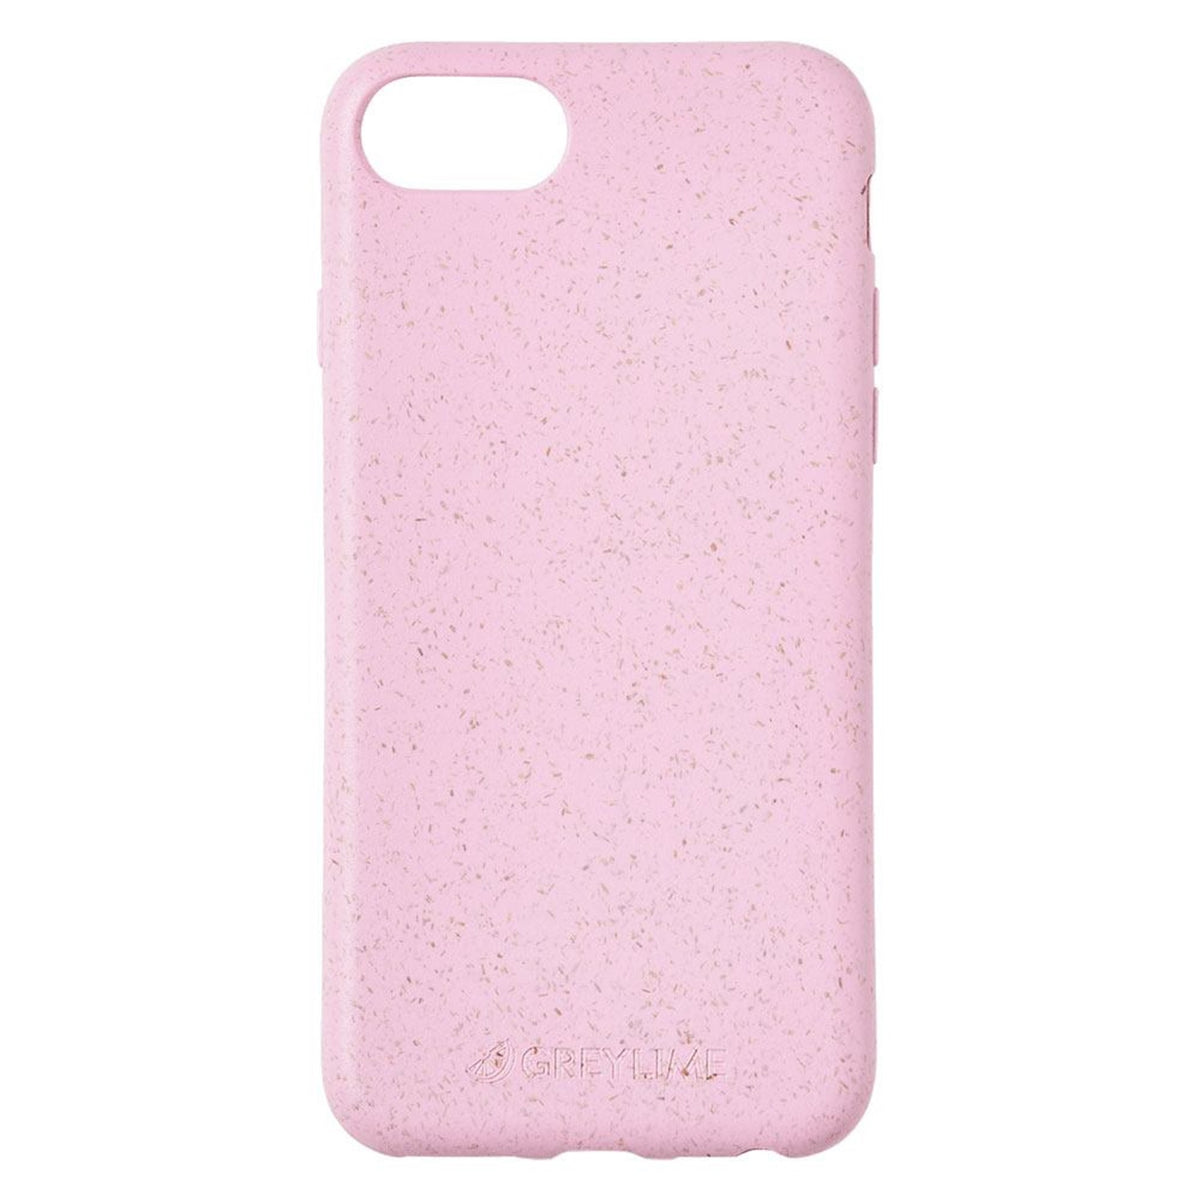 GreyLime-iPhone-6-7-8-Plus-biodegradable-cover-Pink-COIP678P05-V4.jpg